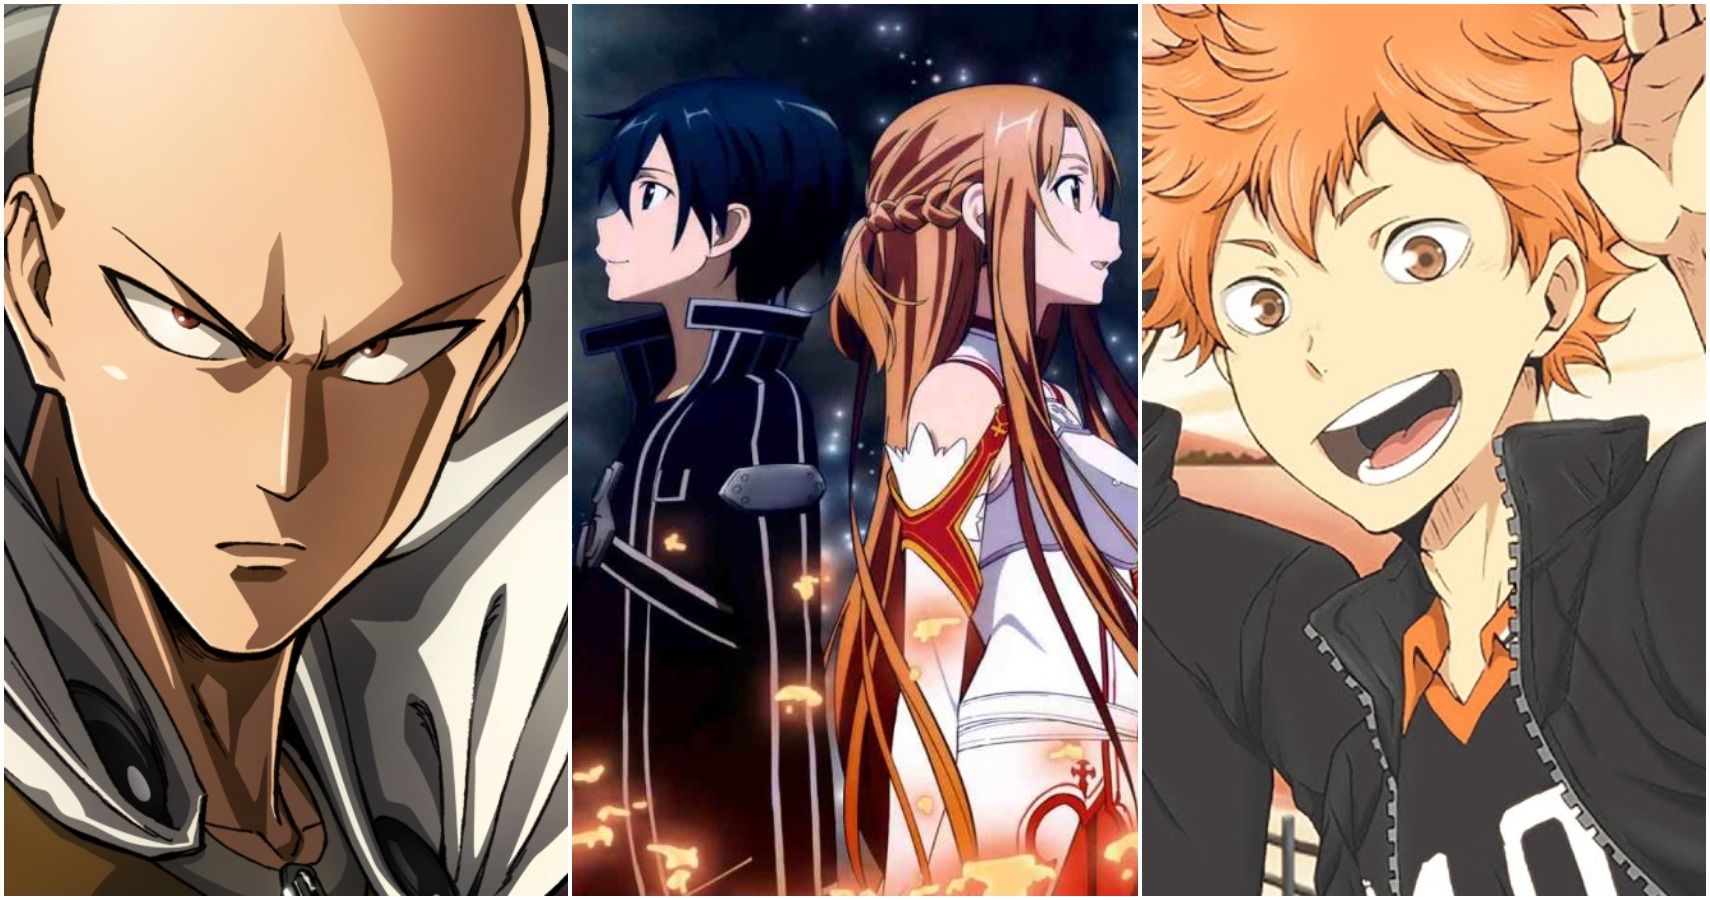 10 Awesome Feel-Good Anime Series To Help You Recover From 2020